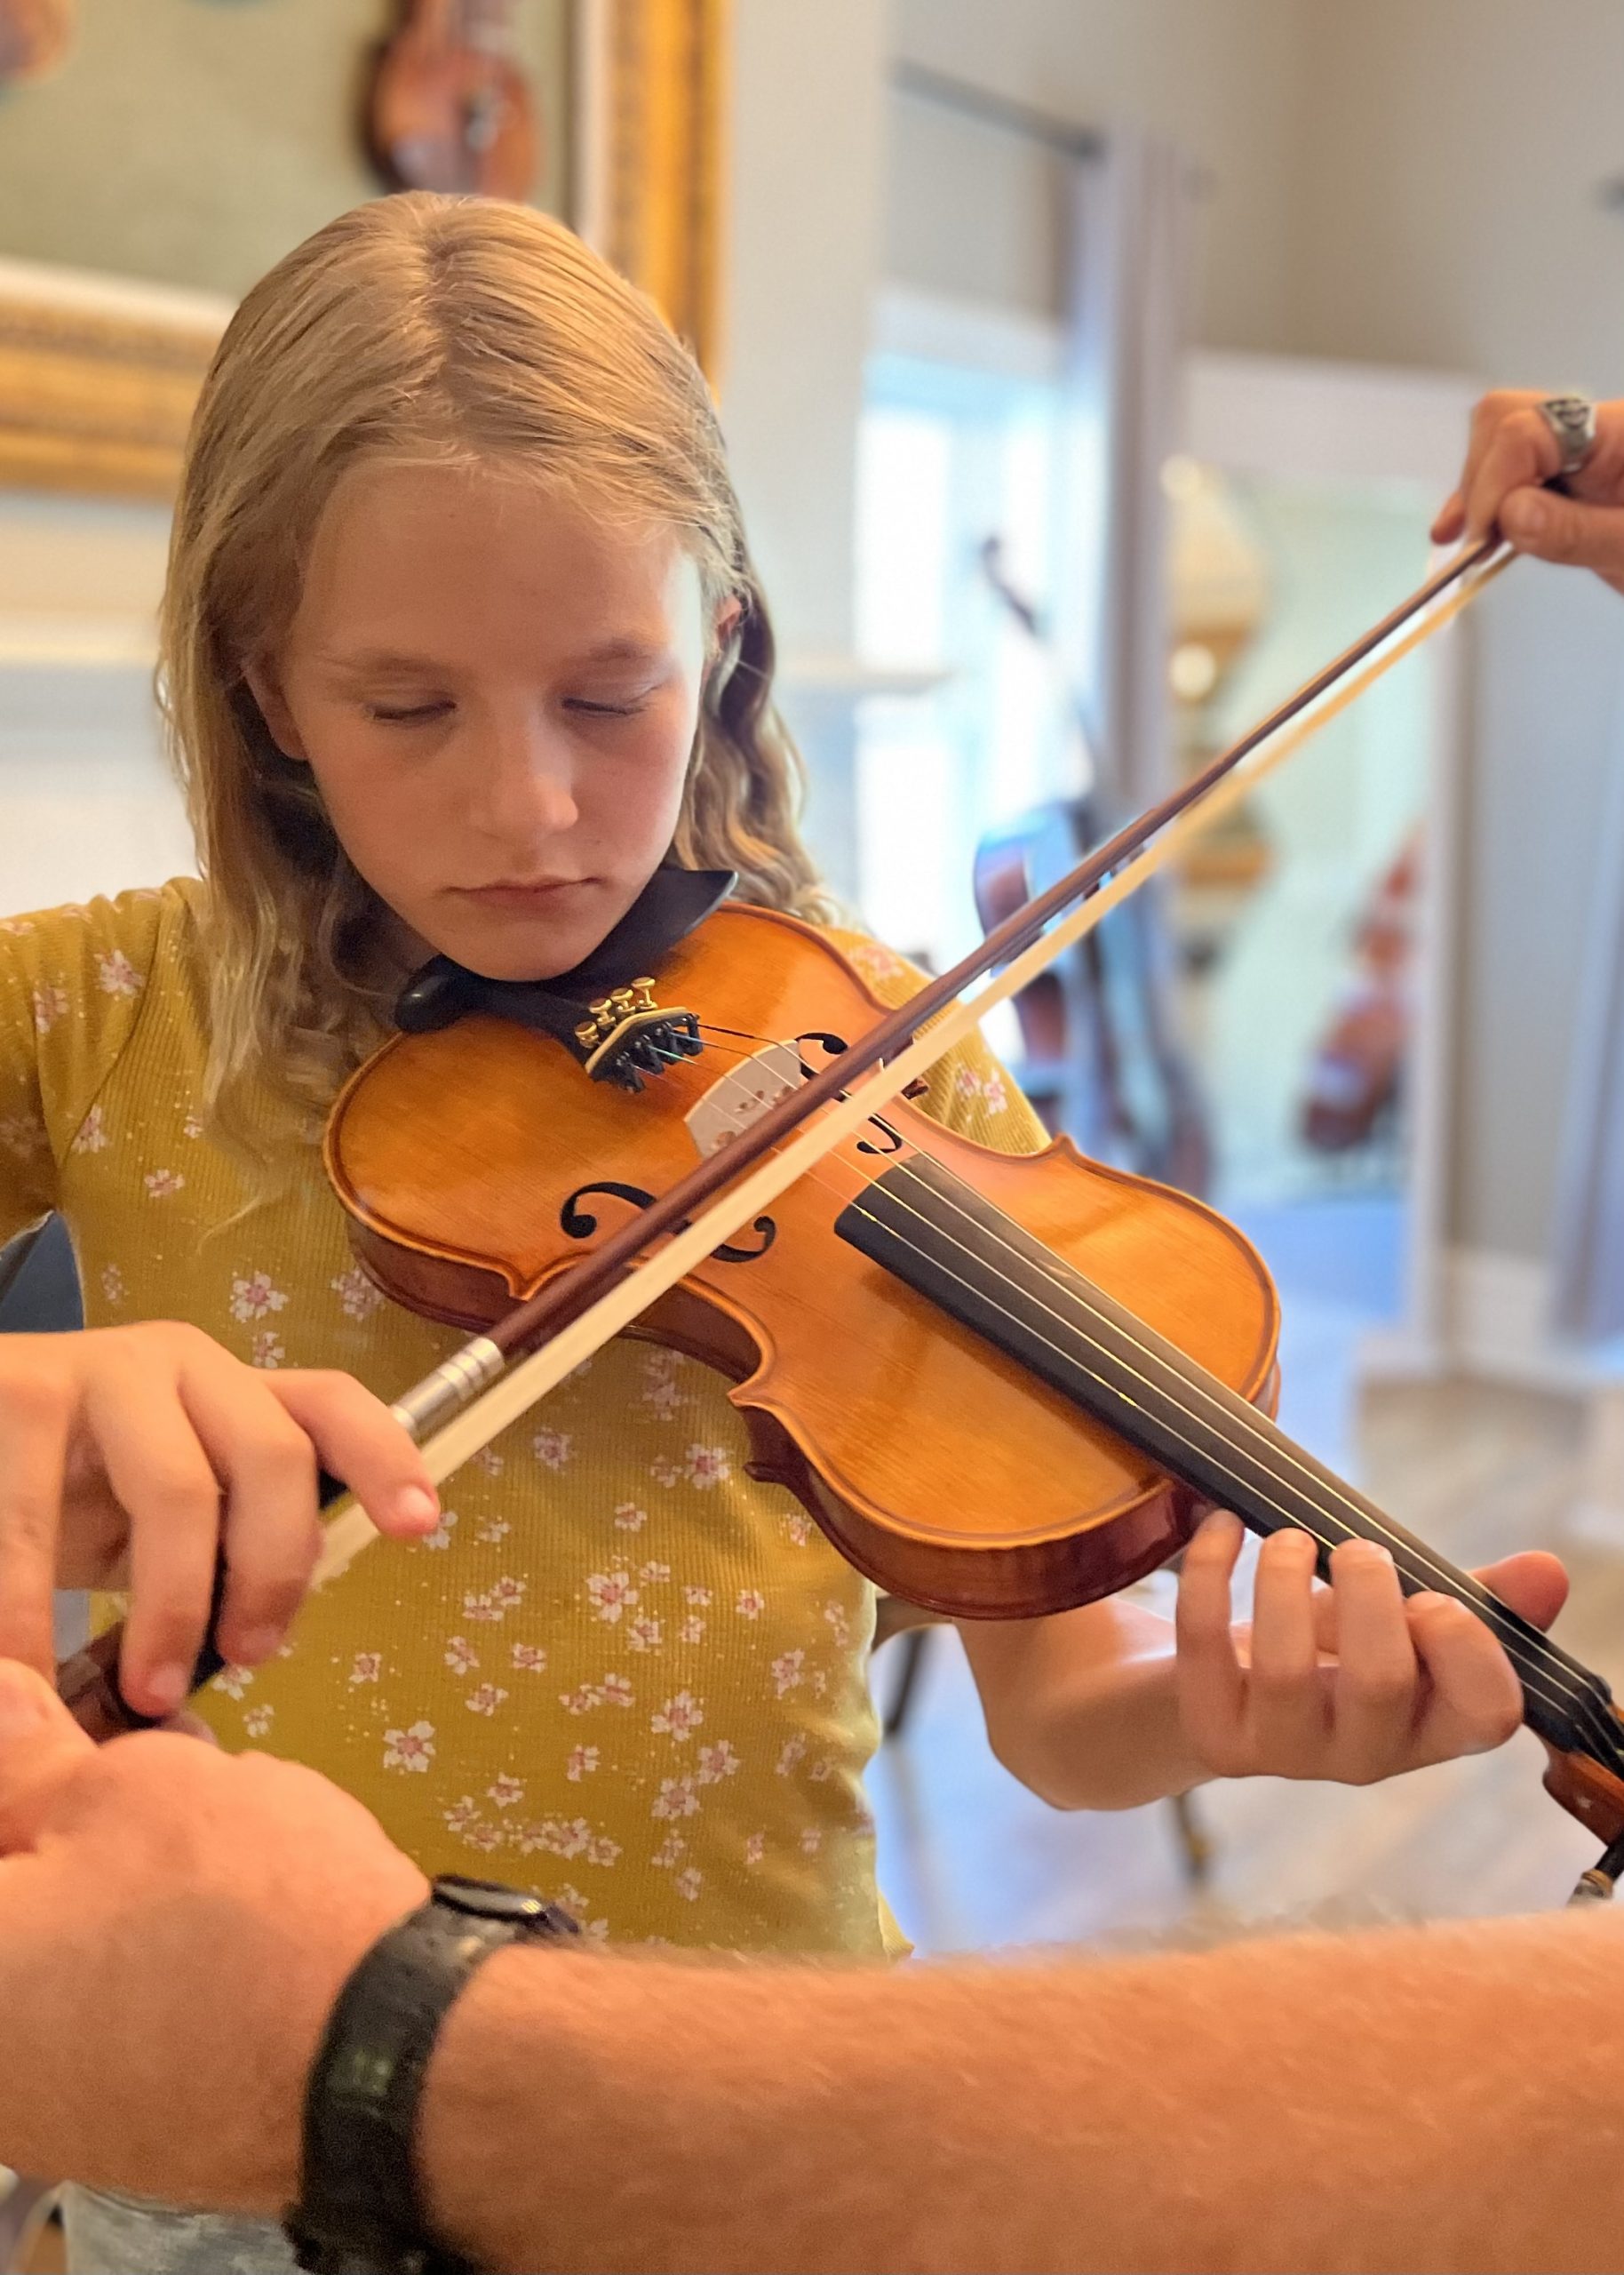 Violin Lessons in St. George at the Violin Gallery